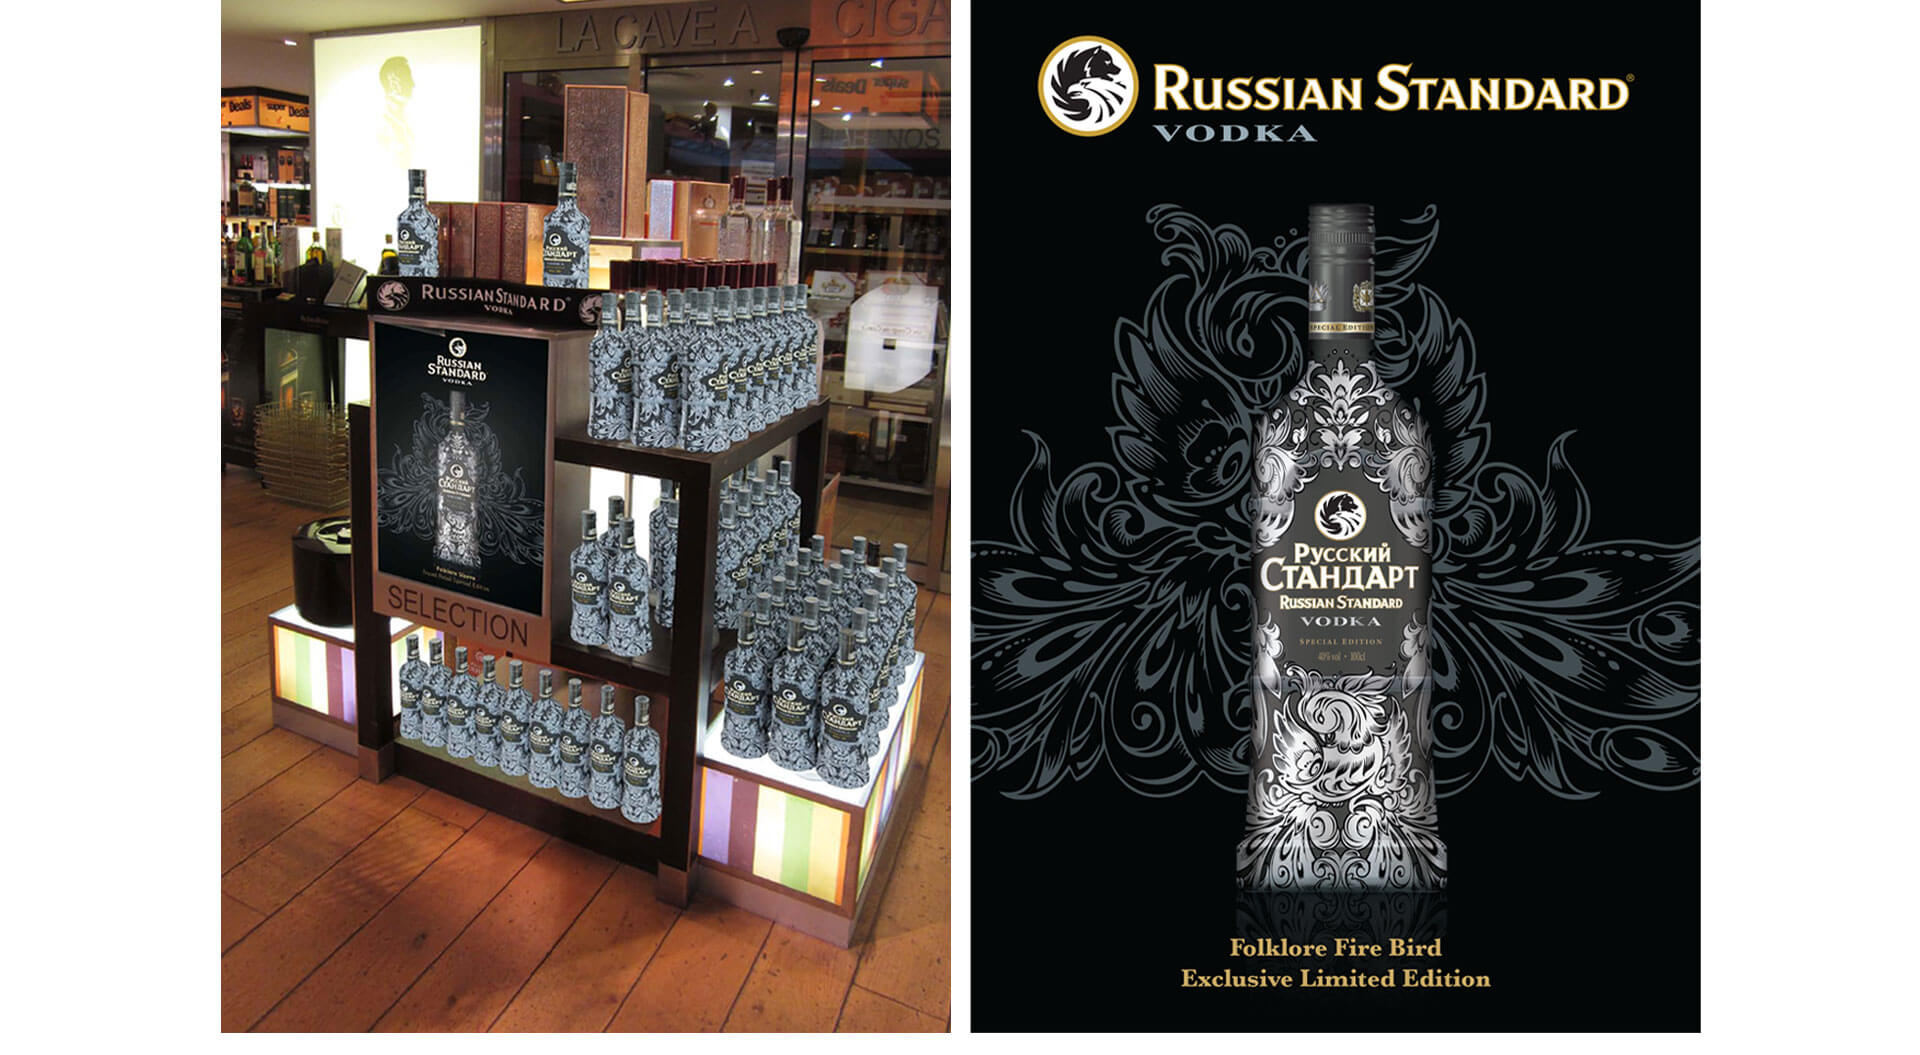 Russian Standard Vodka Folklore Fire Bird Limited Edition promotion travel retail, marketing, merchandising design, airports, duty-free alcohol